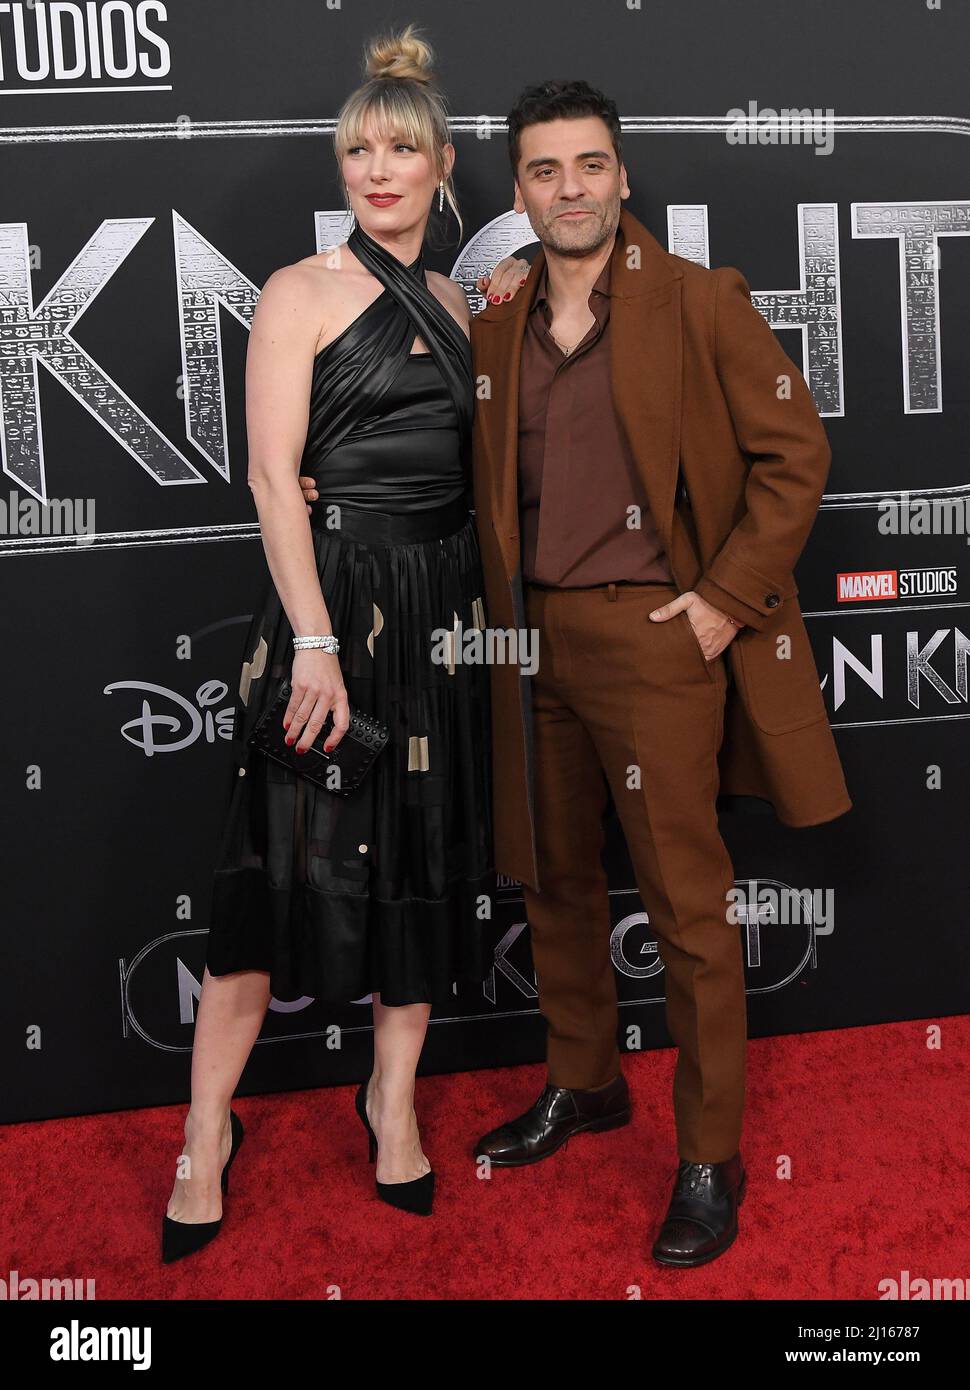 Los Angeles, USA. 22nd Mar, 2022. (L-R) Elvira Lind and Oscar Isaac arrives at Marvel Studios' MOON KNIGHT Premiere held at the El Capitan Theater in Hollywood, CA on Tuesday, ?March 22, 2022. (Photo By Sthanlee B. Mirador/Sipa USA) Credit: Sipa USA/Alamy Live News Stock Photo